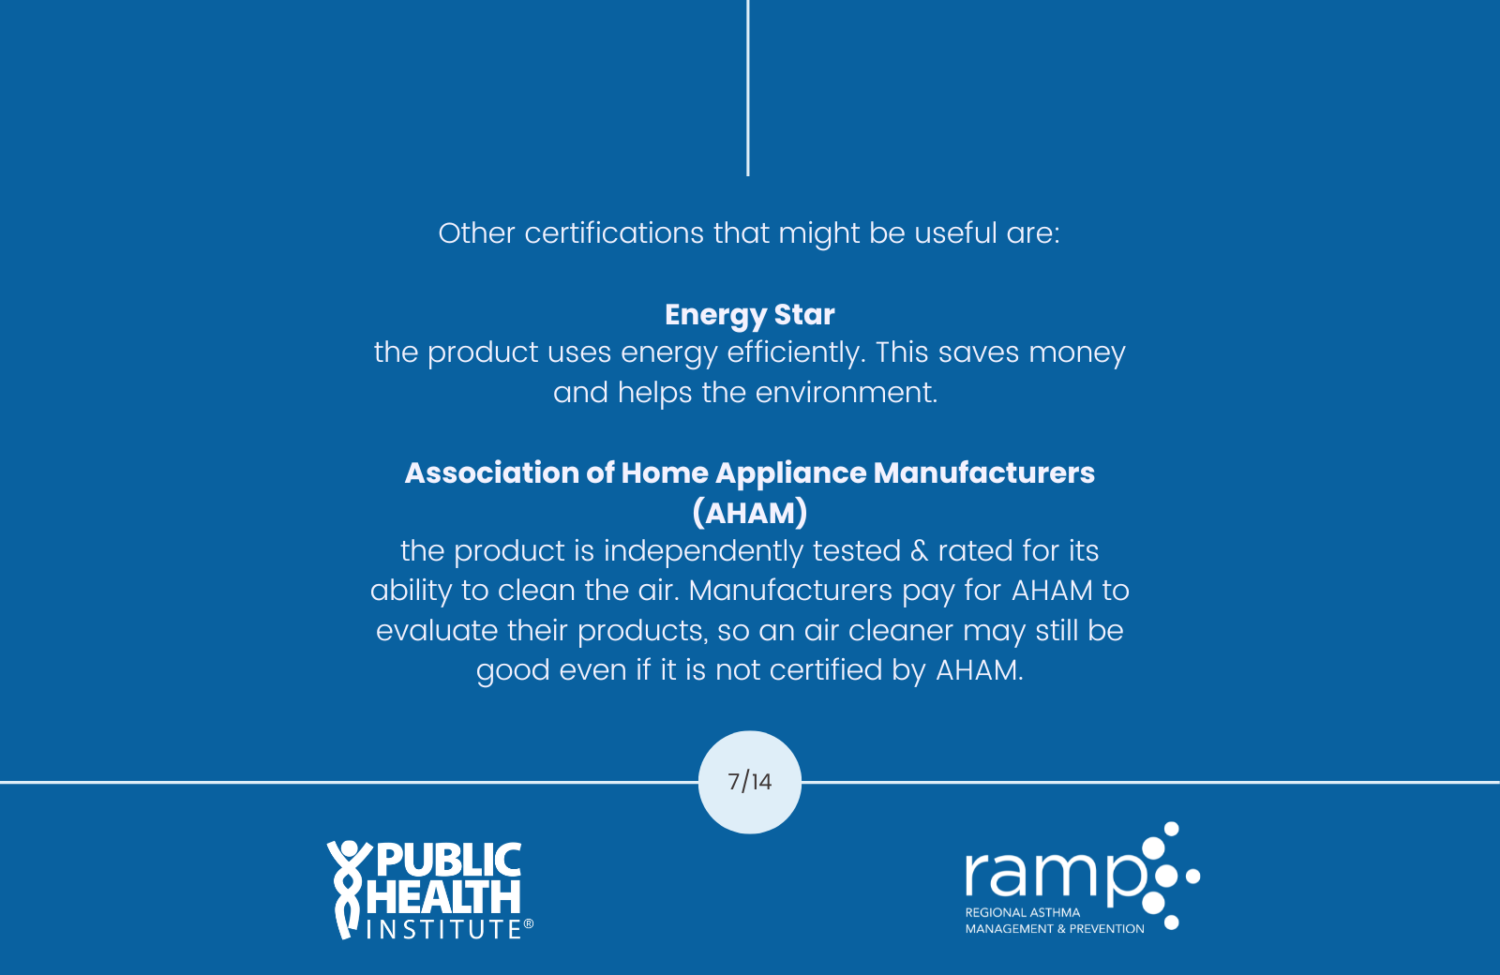 Other certifications that might be useful are: Energy Star the product uses energy efficiently. This saves money and helps the environment. Association of Home Appliance Manufacturers (AHAM) the product is independently tested & rated for its ability to clean the air. Manufacturers pay for AHAM to evaluate their products, so an air cleaner may still be good even if it is not certified by AHAM.